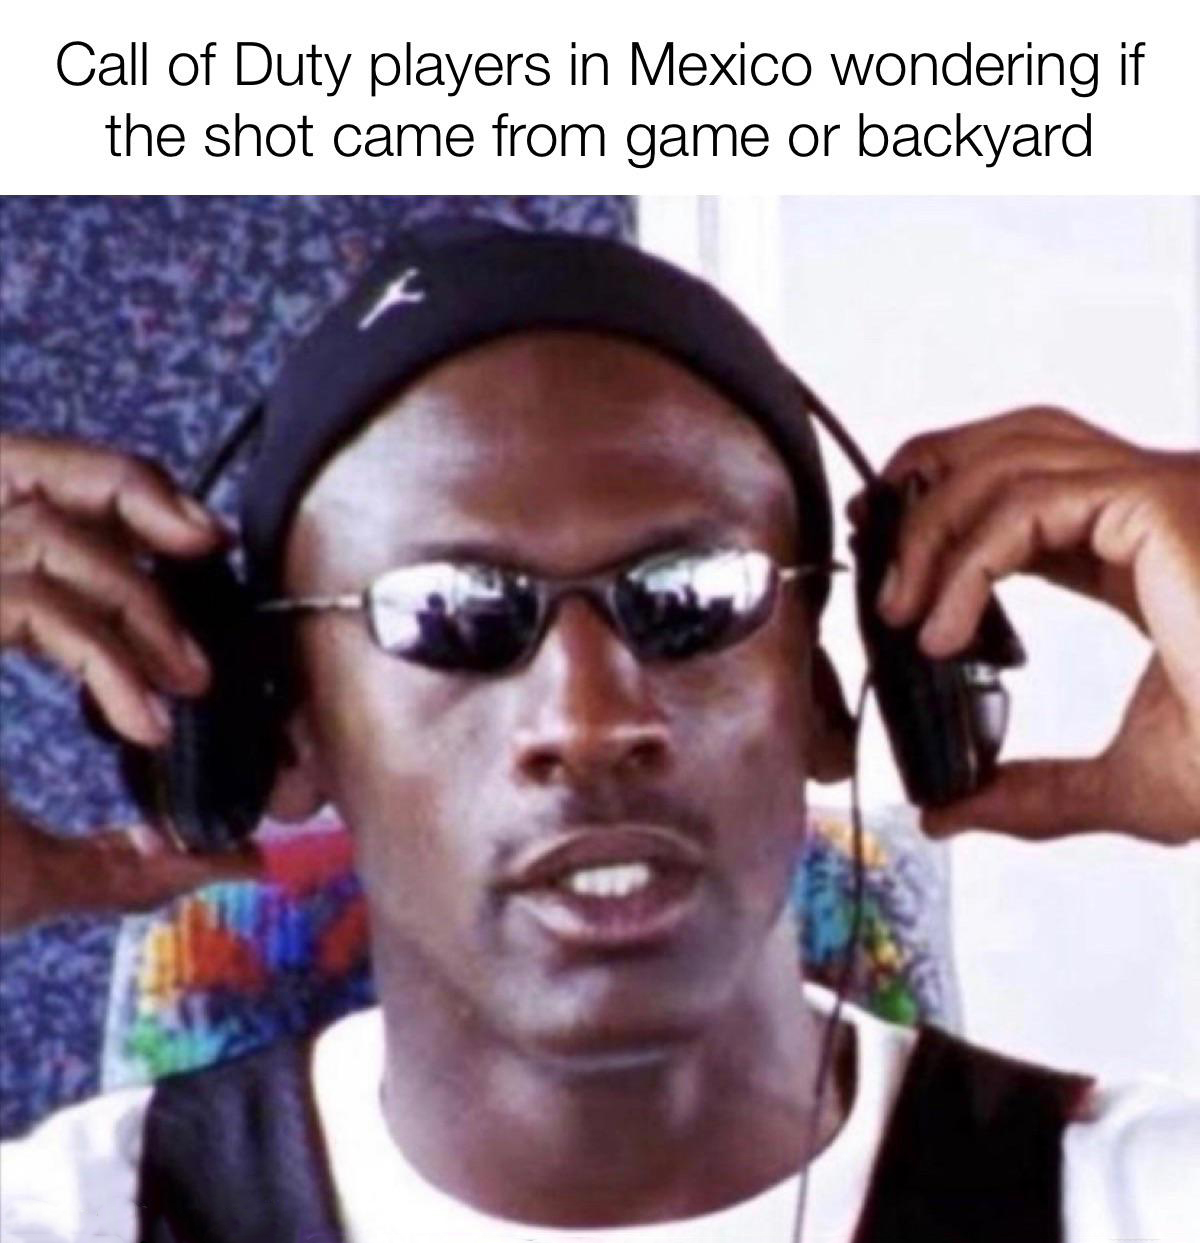 fresh memes - michael jordan on bus - Call of Duty players in Mexico wondering if the shot came from game or backyard